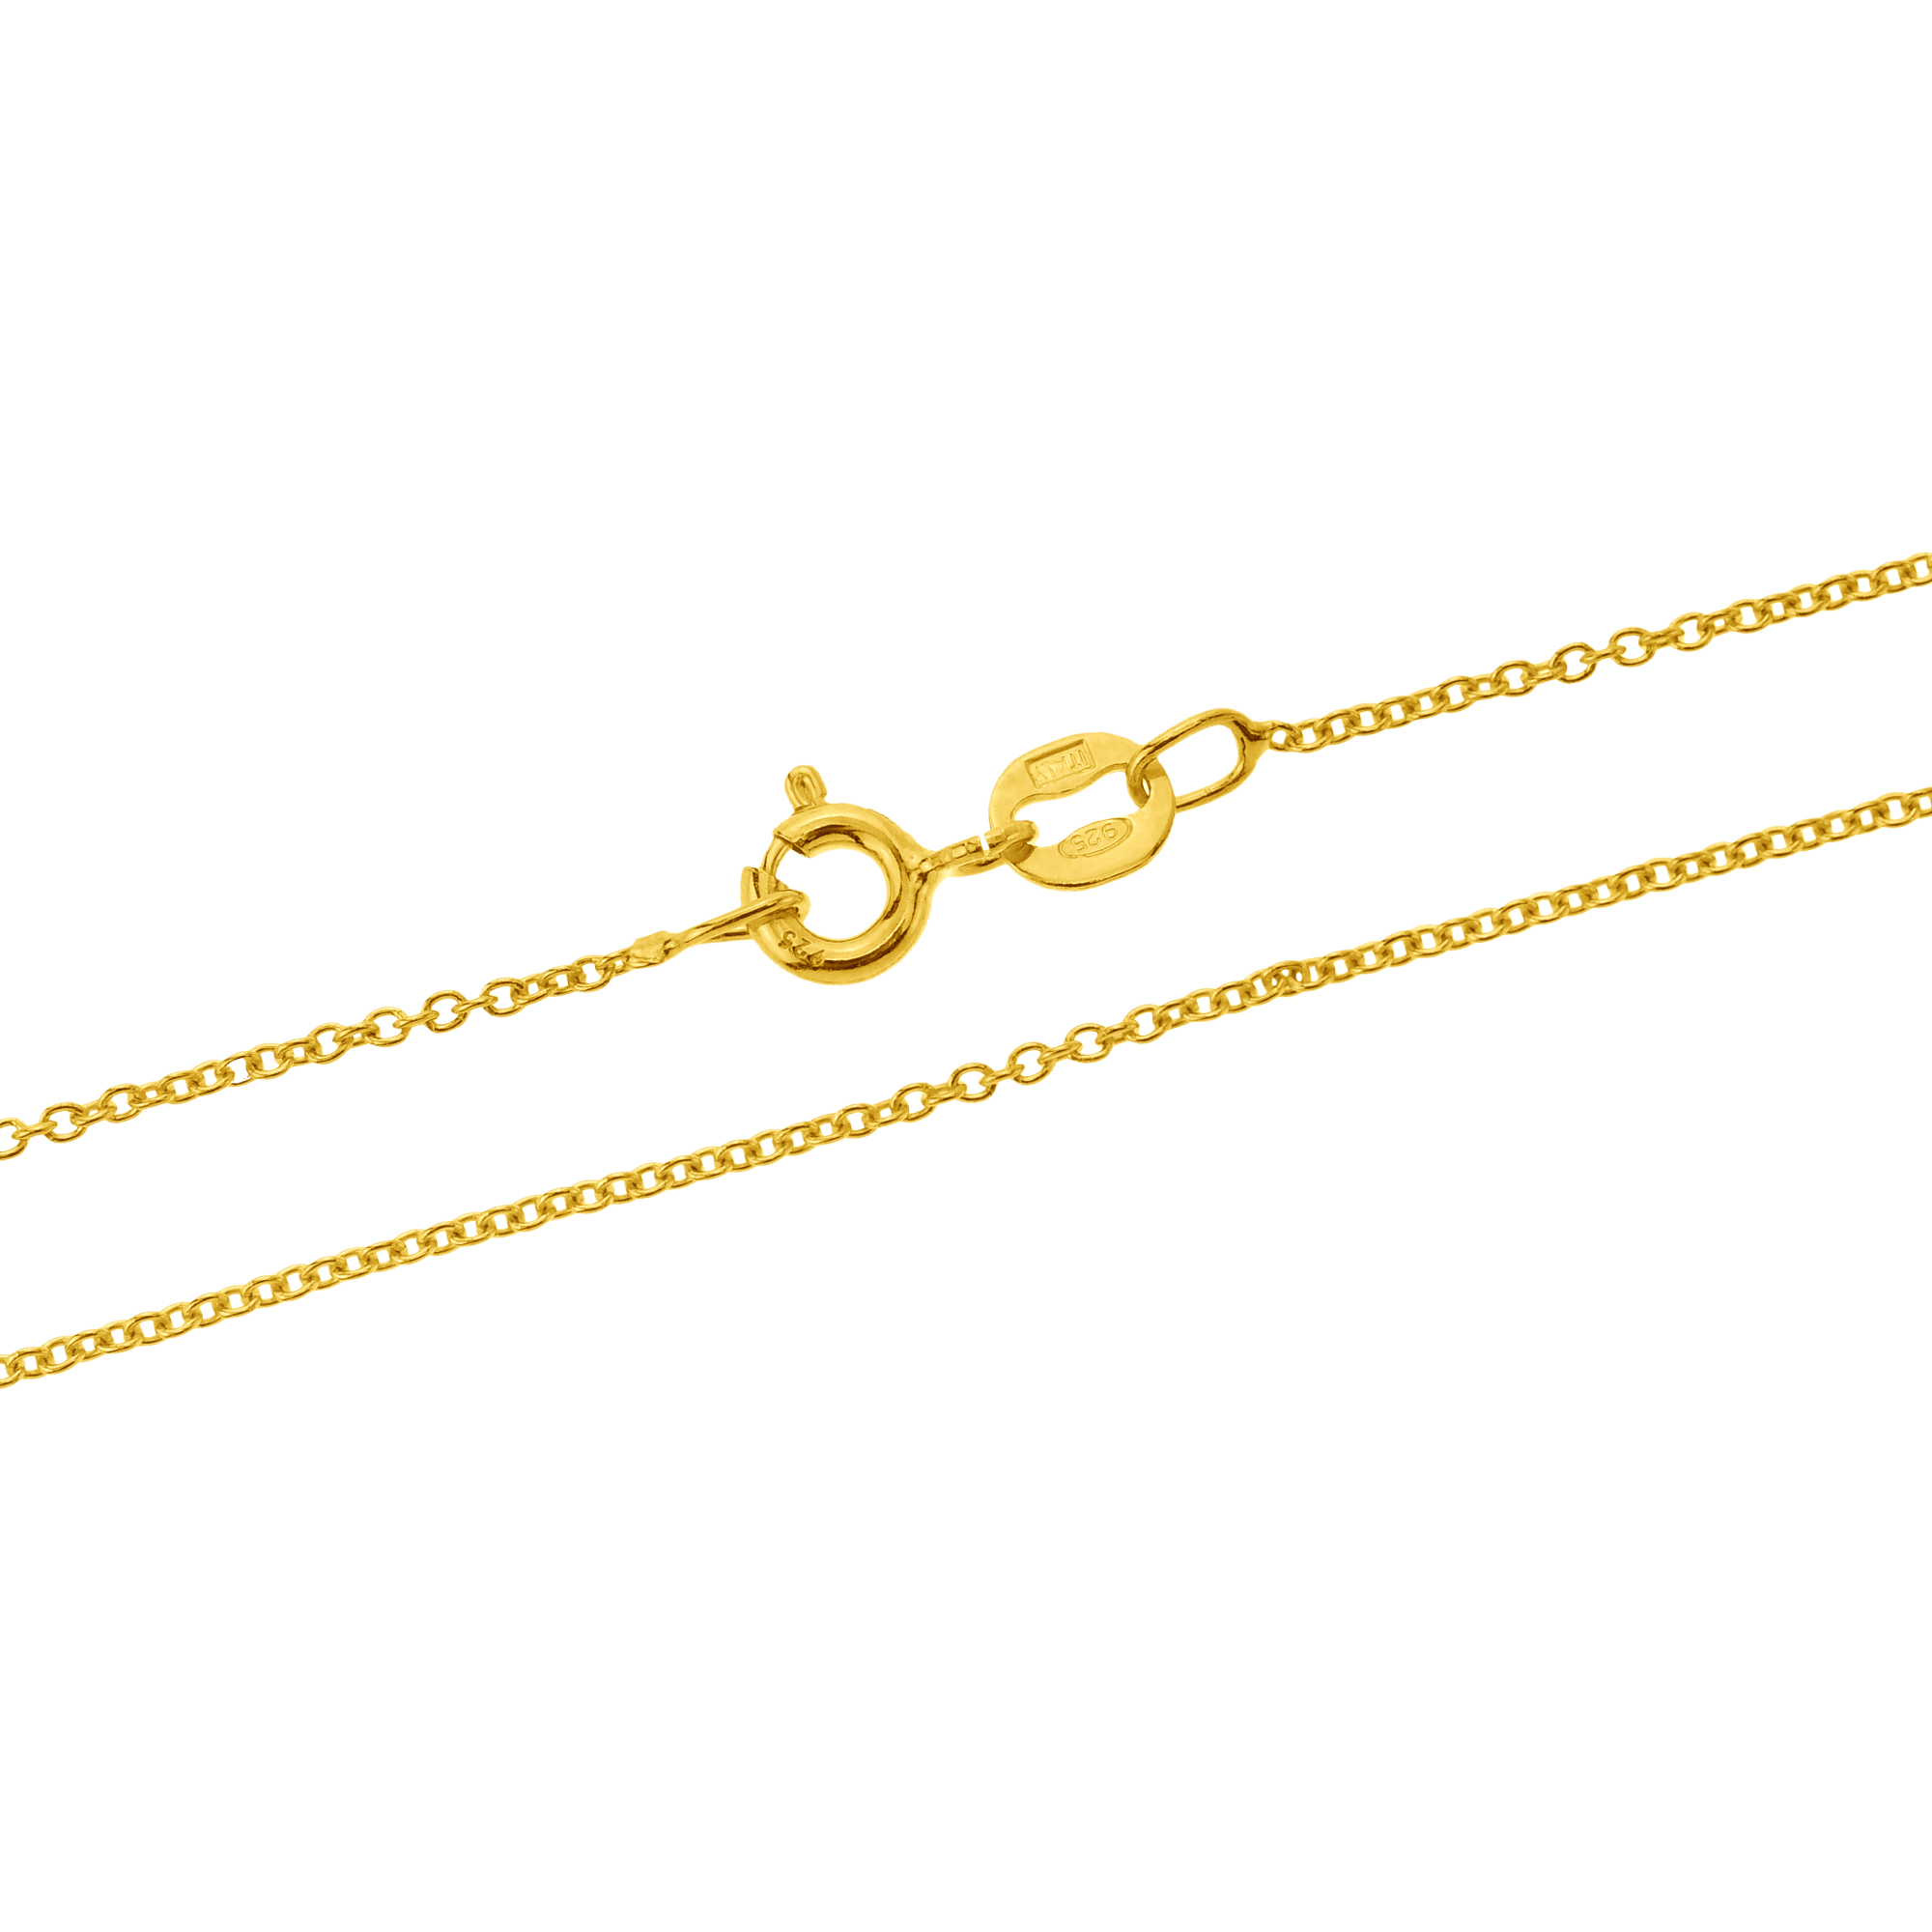 Stylish Gold-Plated 18-inch Sterling Silver Cable Chain Necklace | eBay